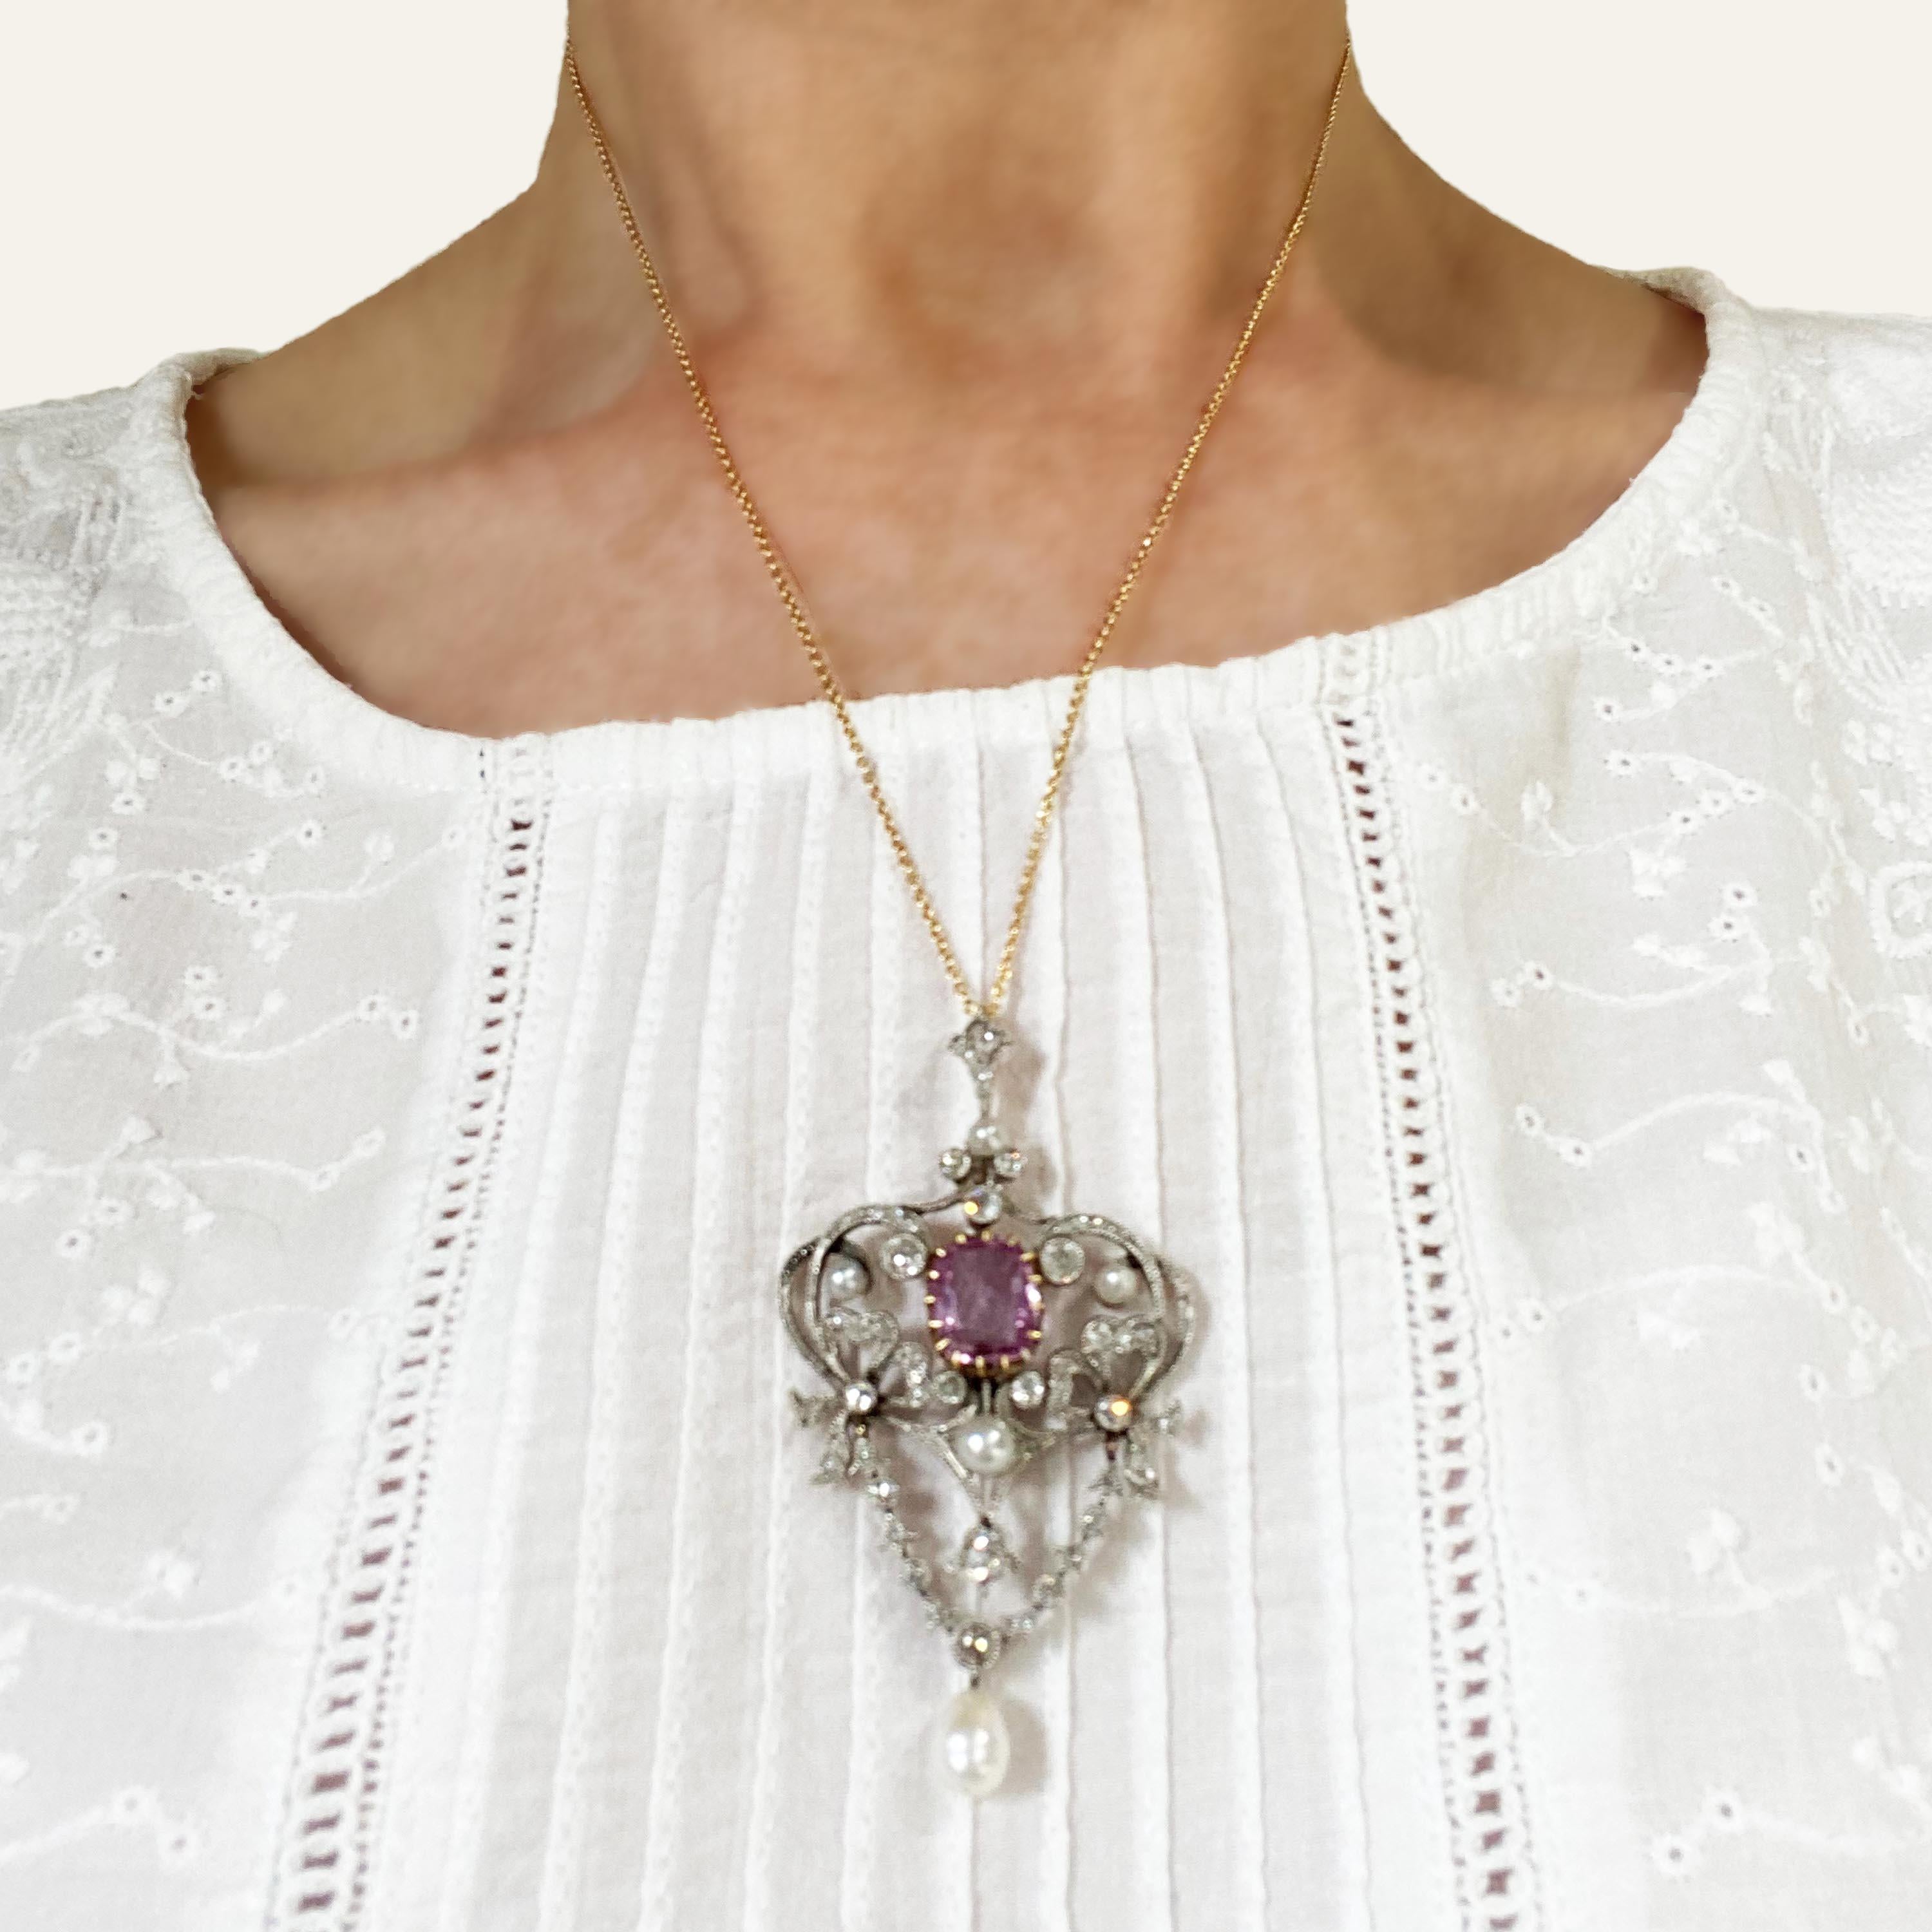 A modern belle époque style pendant, set with a native cushion-cut pink sapphire, weighing approximately 3.00 carats, in a yellow gold claw setting, in an  Art Nouveau influenced, foliate scroll surround, set with bouton and drop shape pearls and